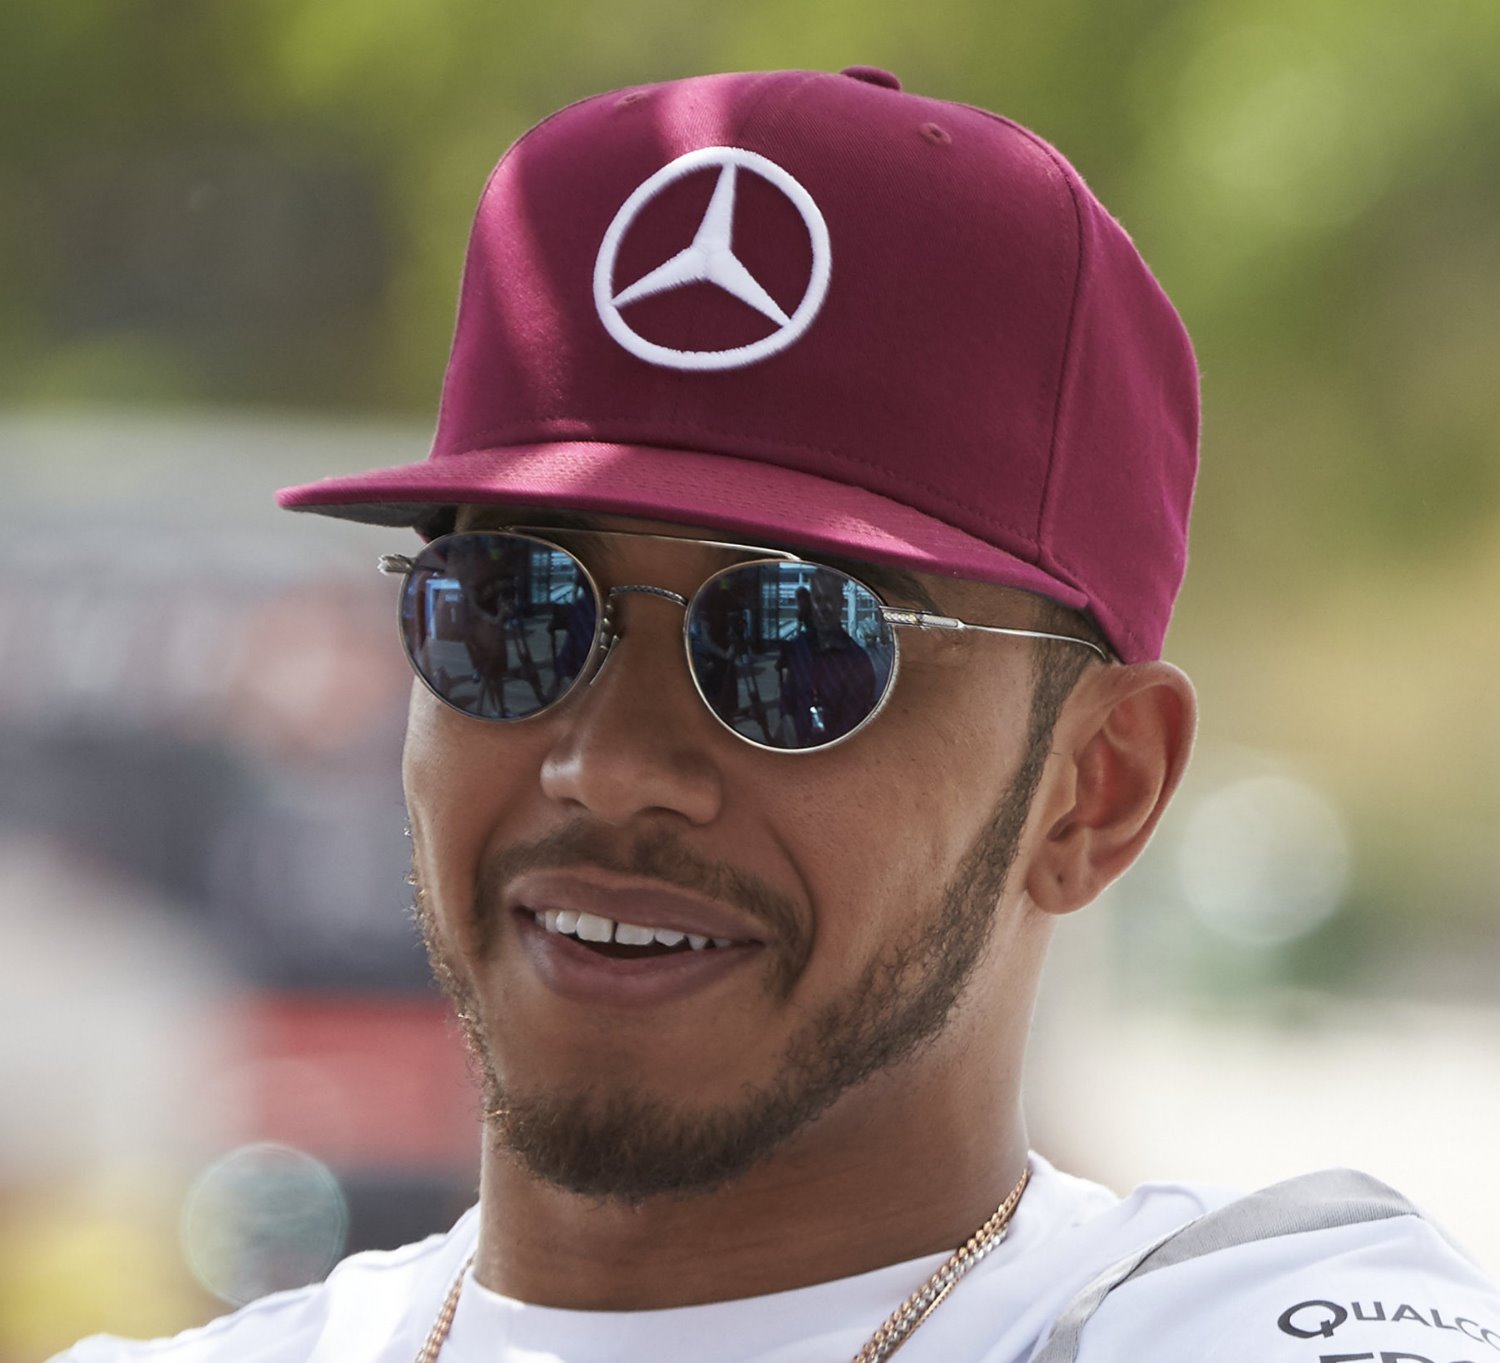 Hamilton was happy with his pace